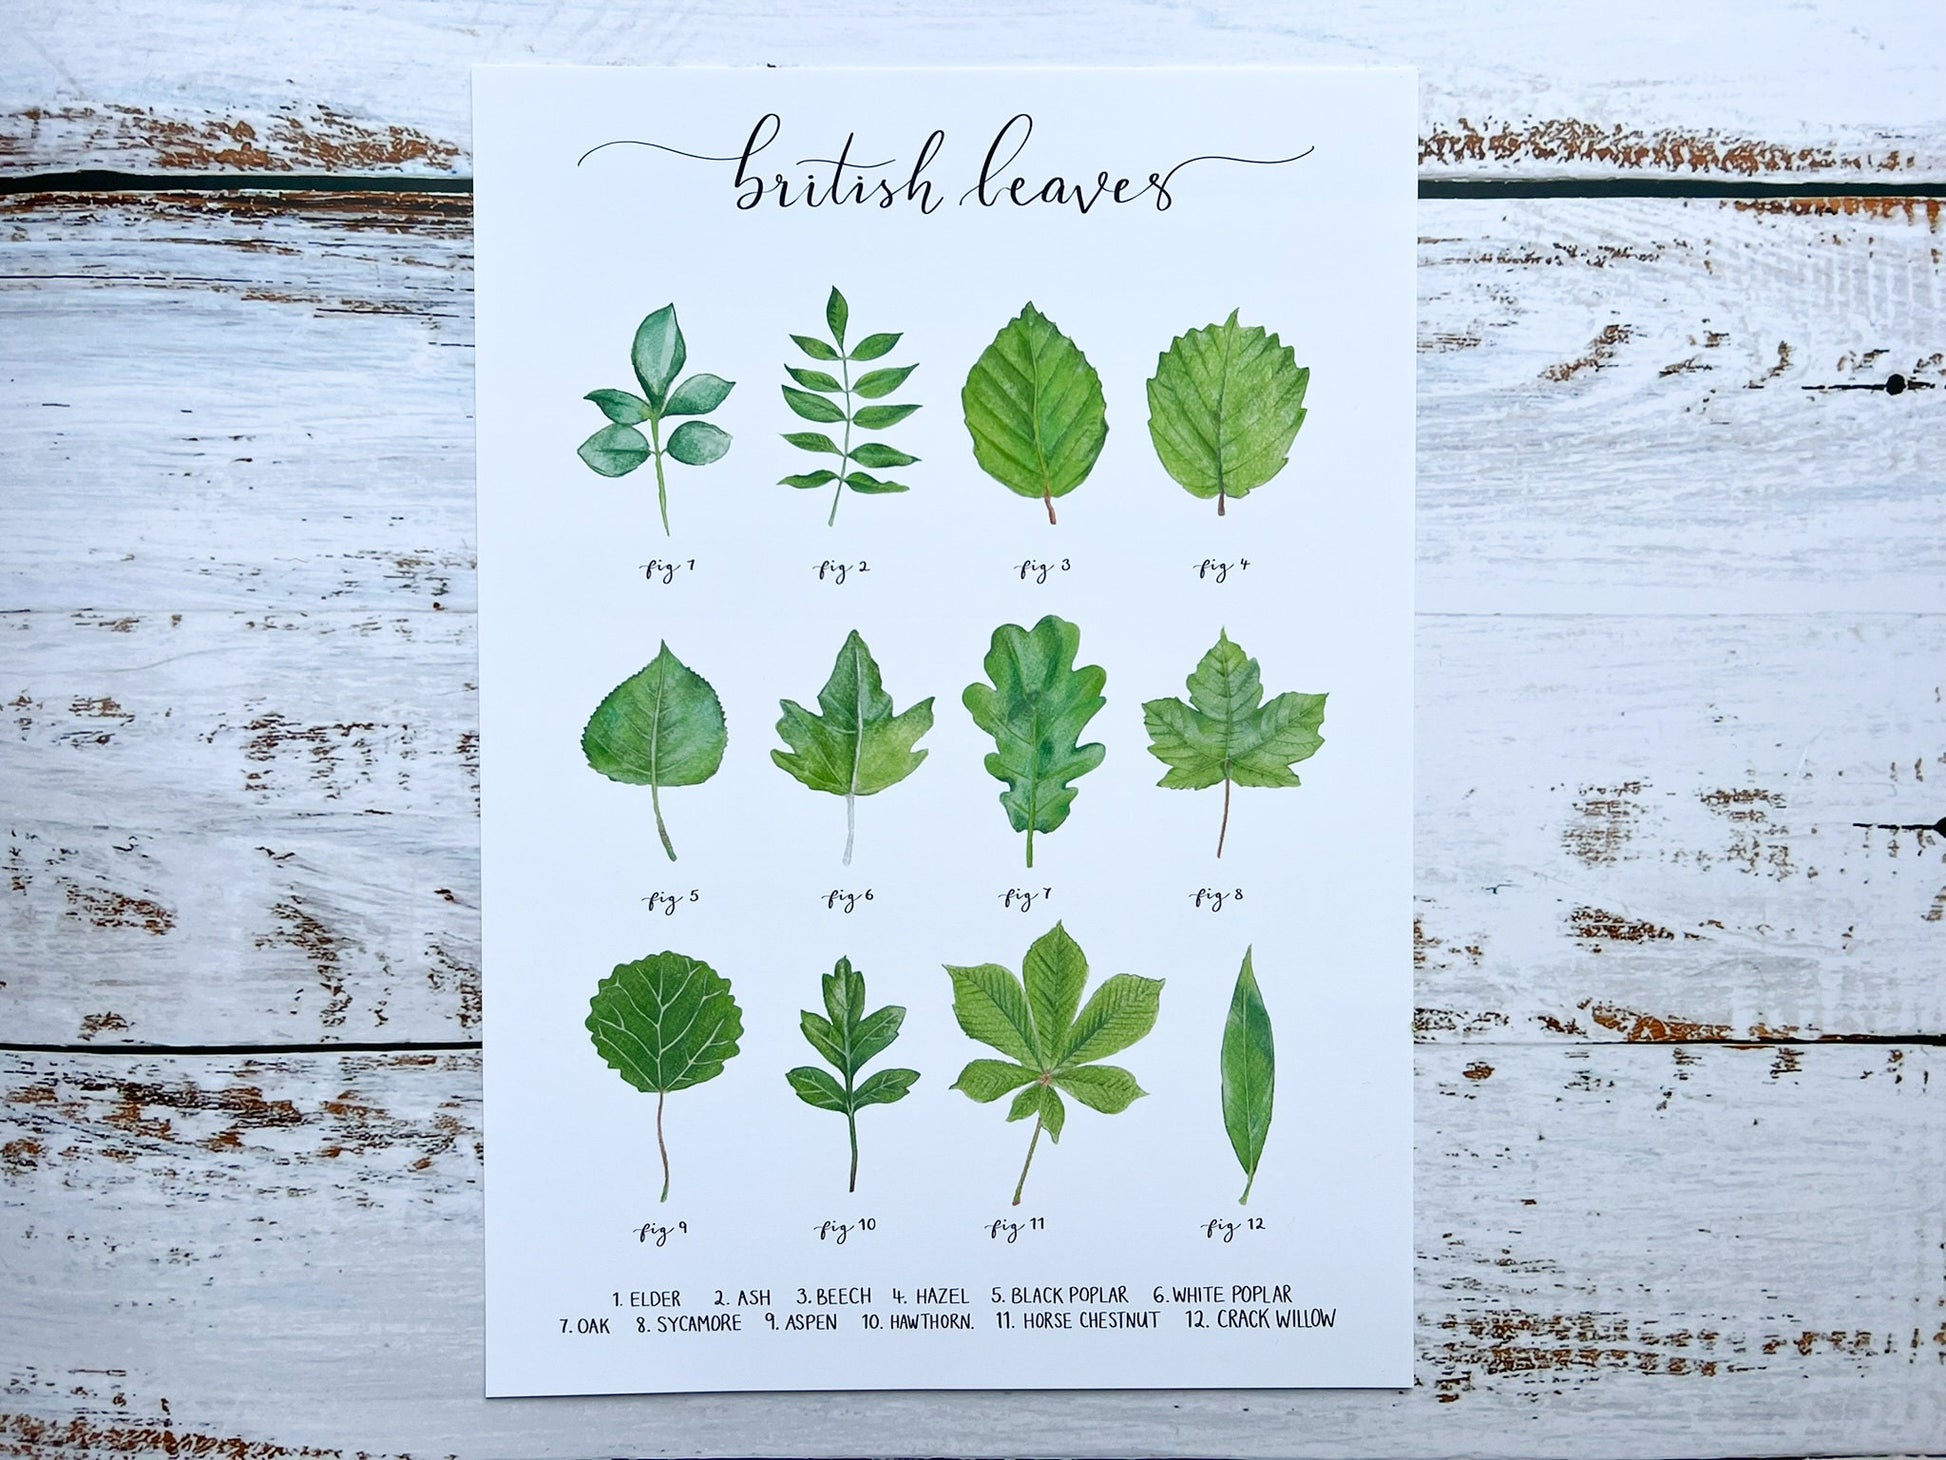 An A4 watercolour print of 12 leaves found on British trees, the name of each leaf is at the bottom